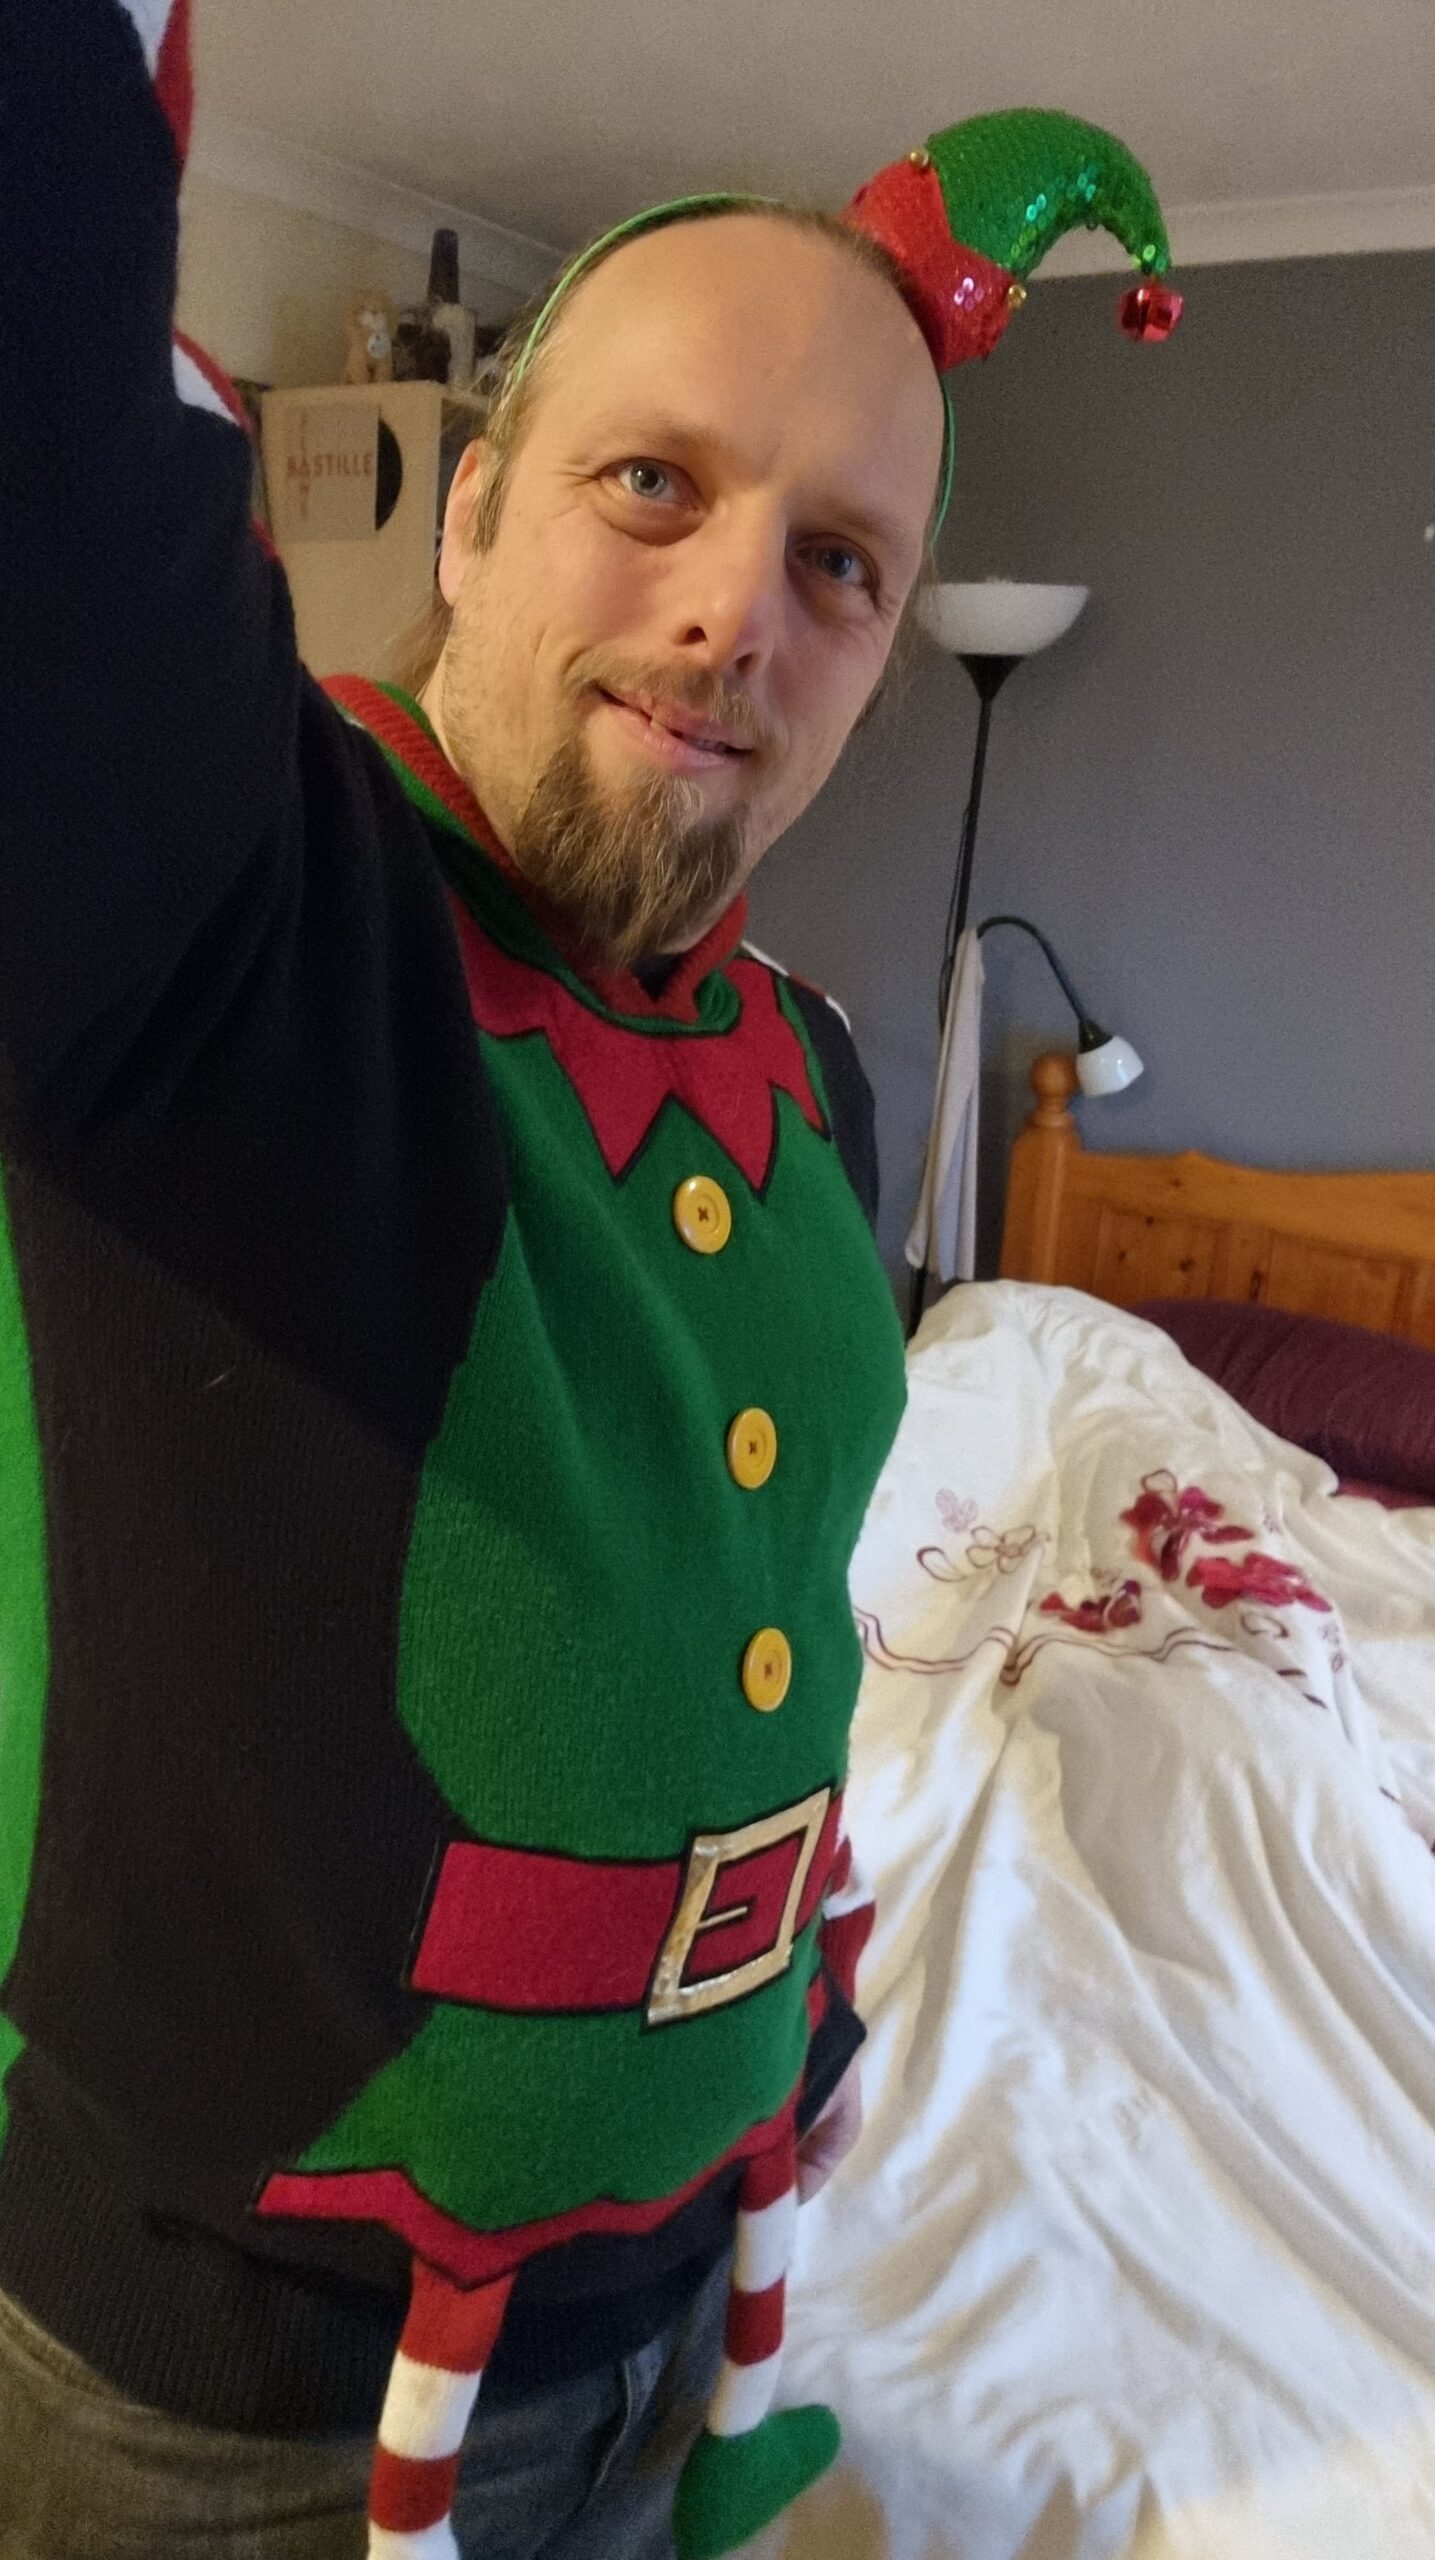 Selfie of Dan wearing an "elf costume" Christmas jumper and matching hat with bell.